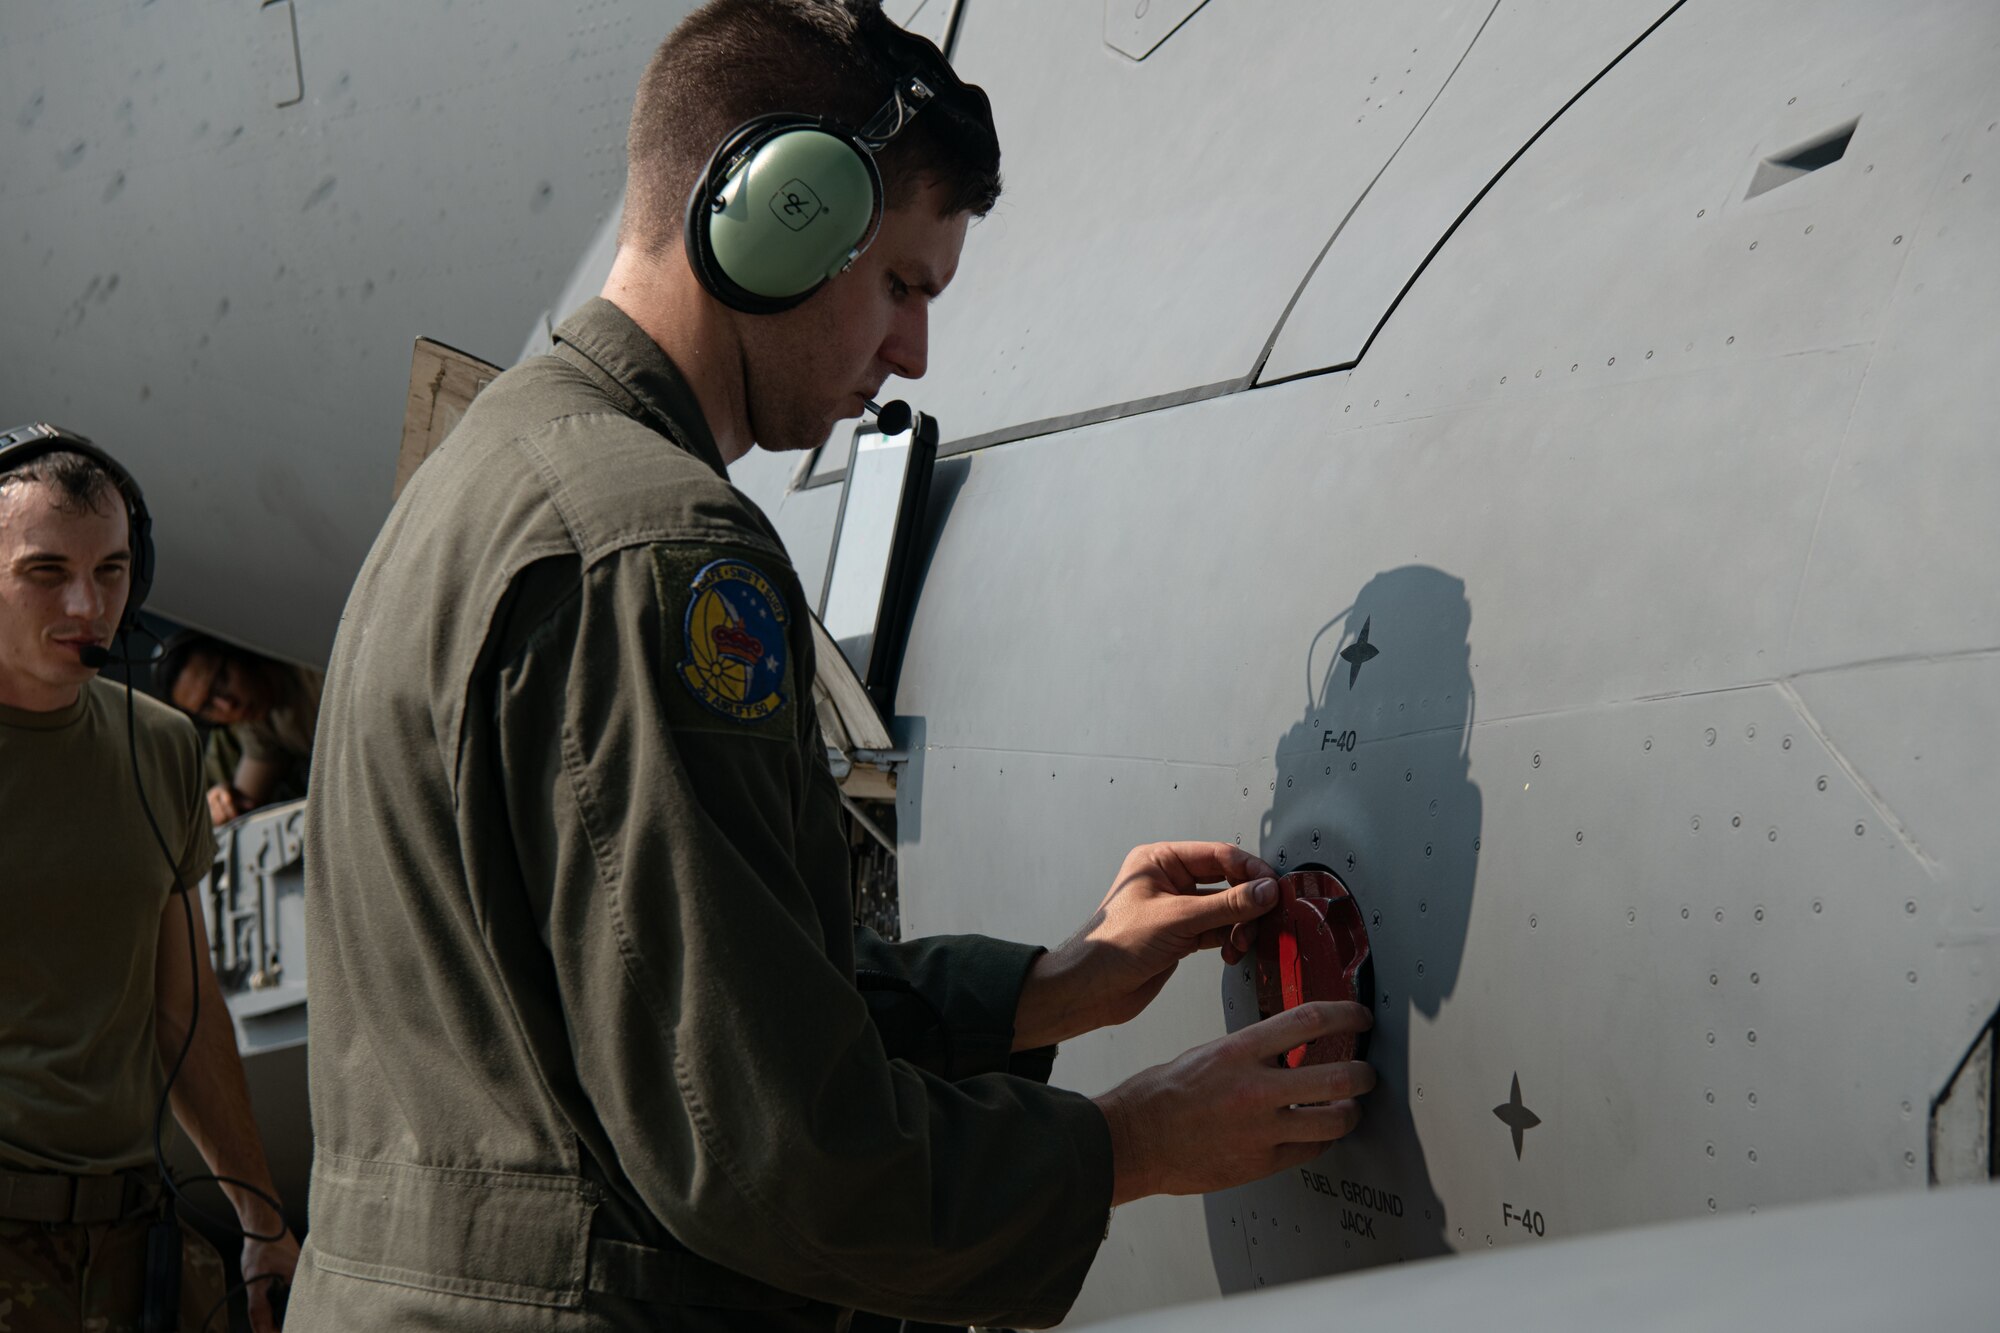 Staff Sgt. Morgen Sindelar, 3rd Airlift Squadron loadmaster, secures a fuel cap onto a C-17 Globemaster III on Dover Air Force Base, Delaware, July 30, 2021